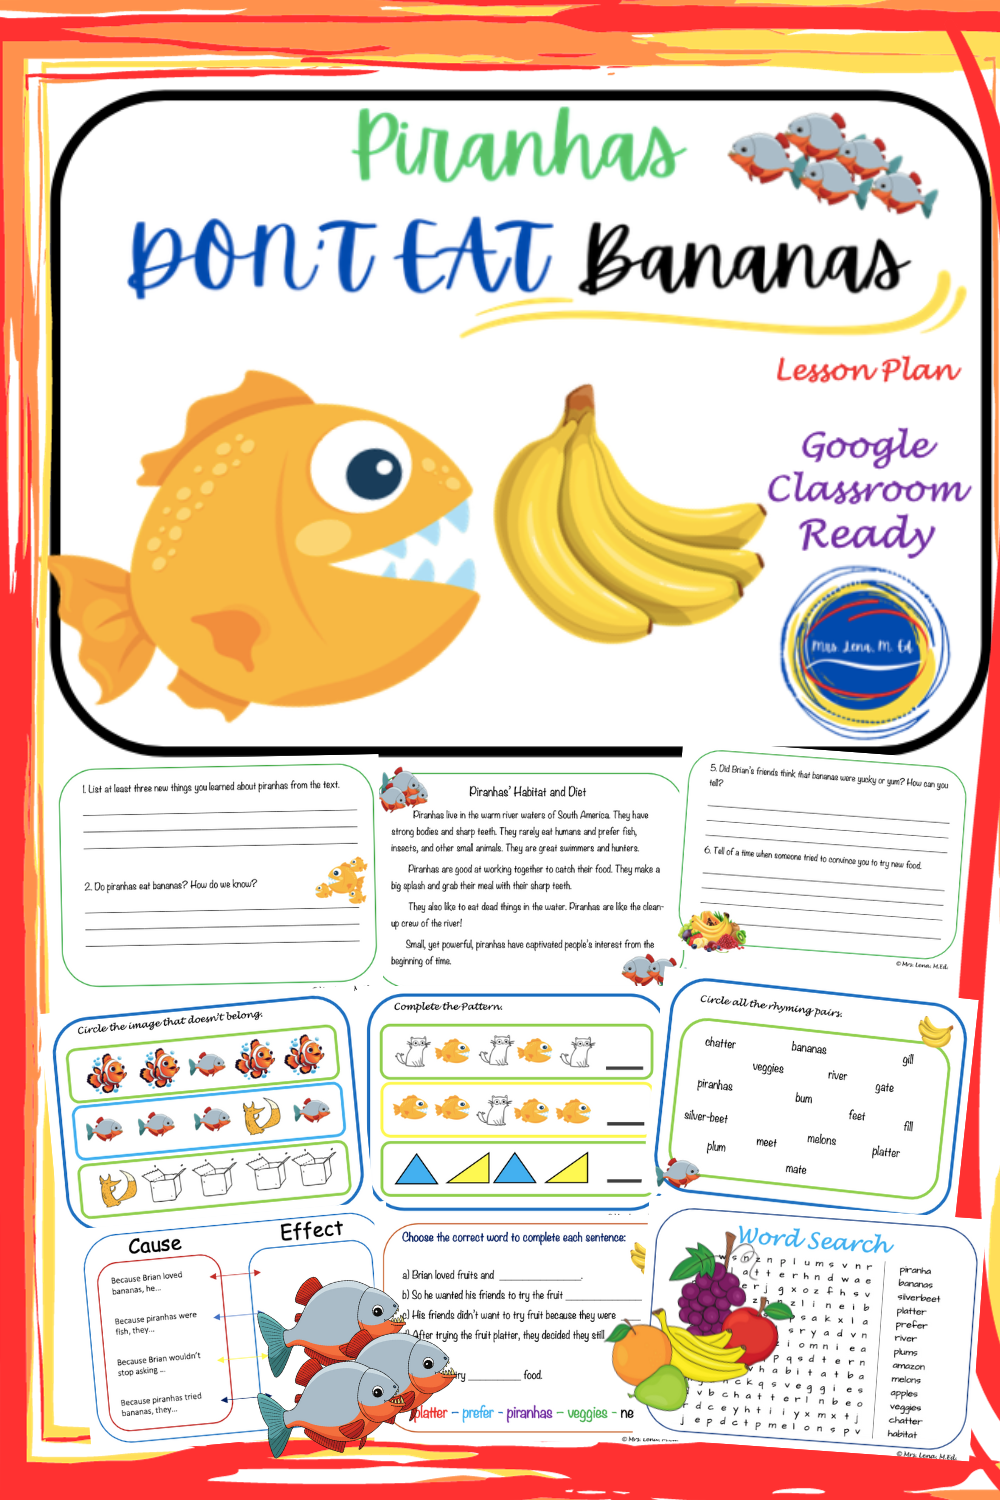 Piranhas Don't Eat Bananas by Blabey NO PREP lesson plan is a cross-curriculum language arts and science resource.